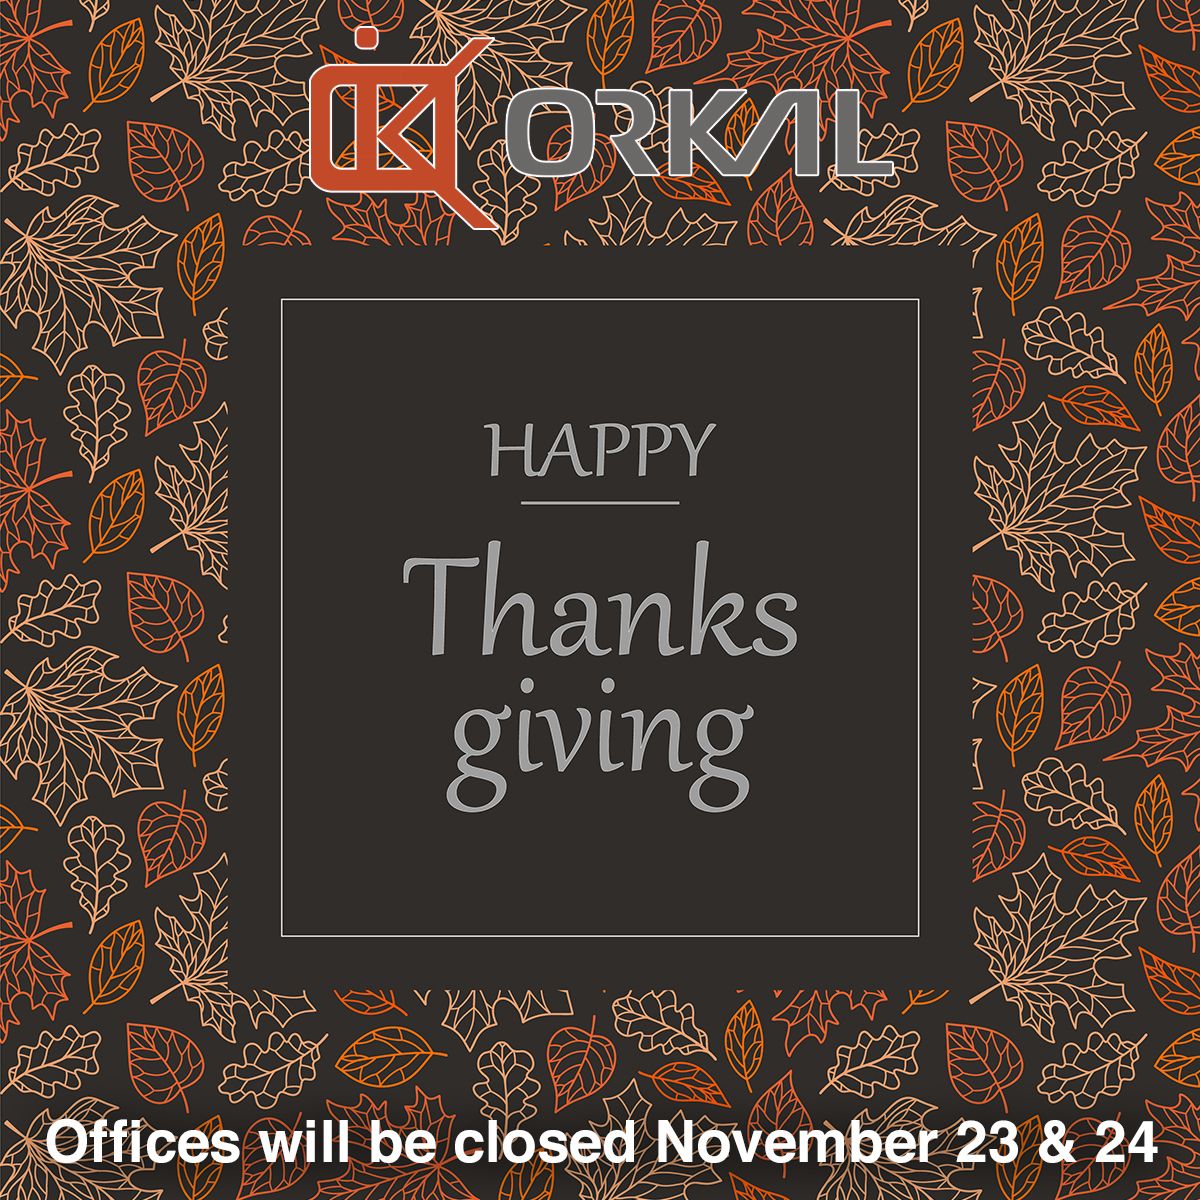 happy thanksgiving 2023 holiday closure notice for 'okml' with decorative autumn leaf border. offices closed november 23 & 24.